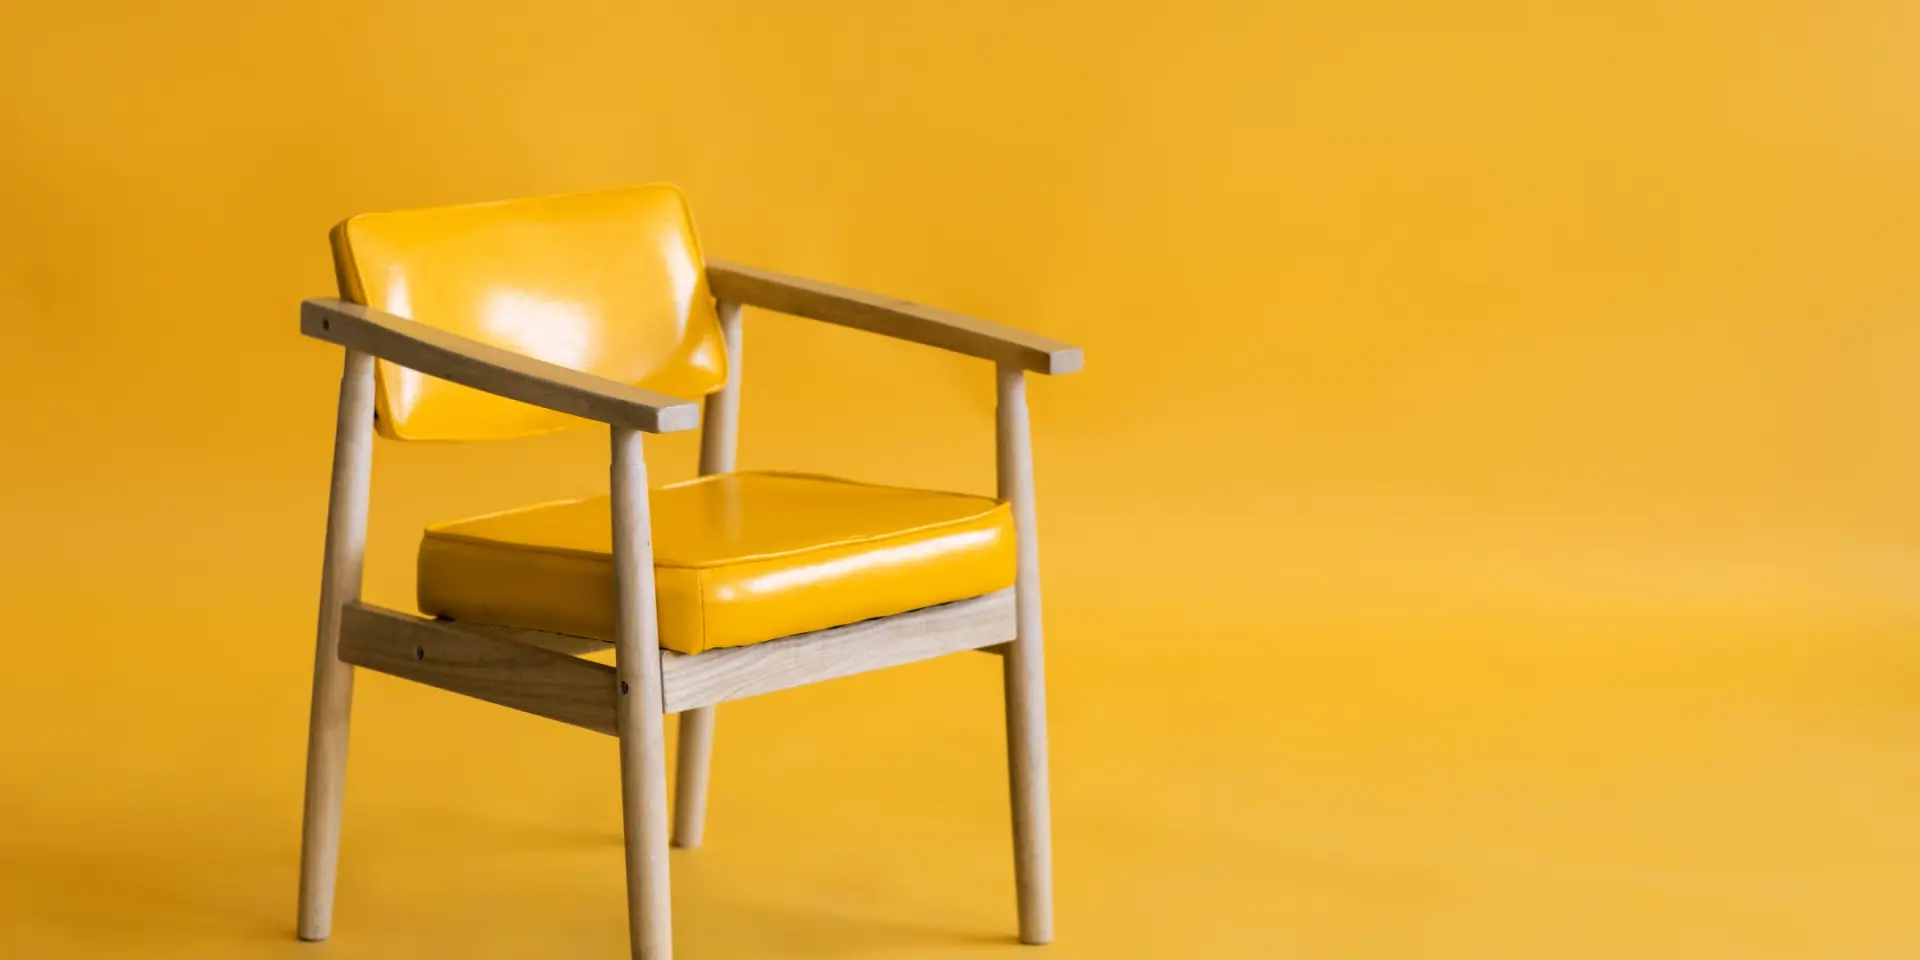 A wooden chair with a yellow seat and back sitting on one side of an otherwise empty yellow room.